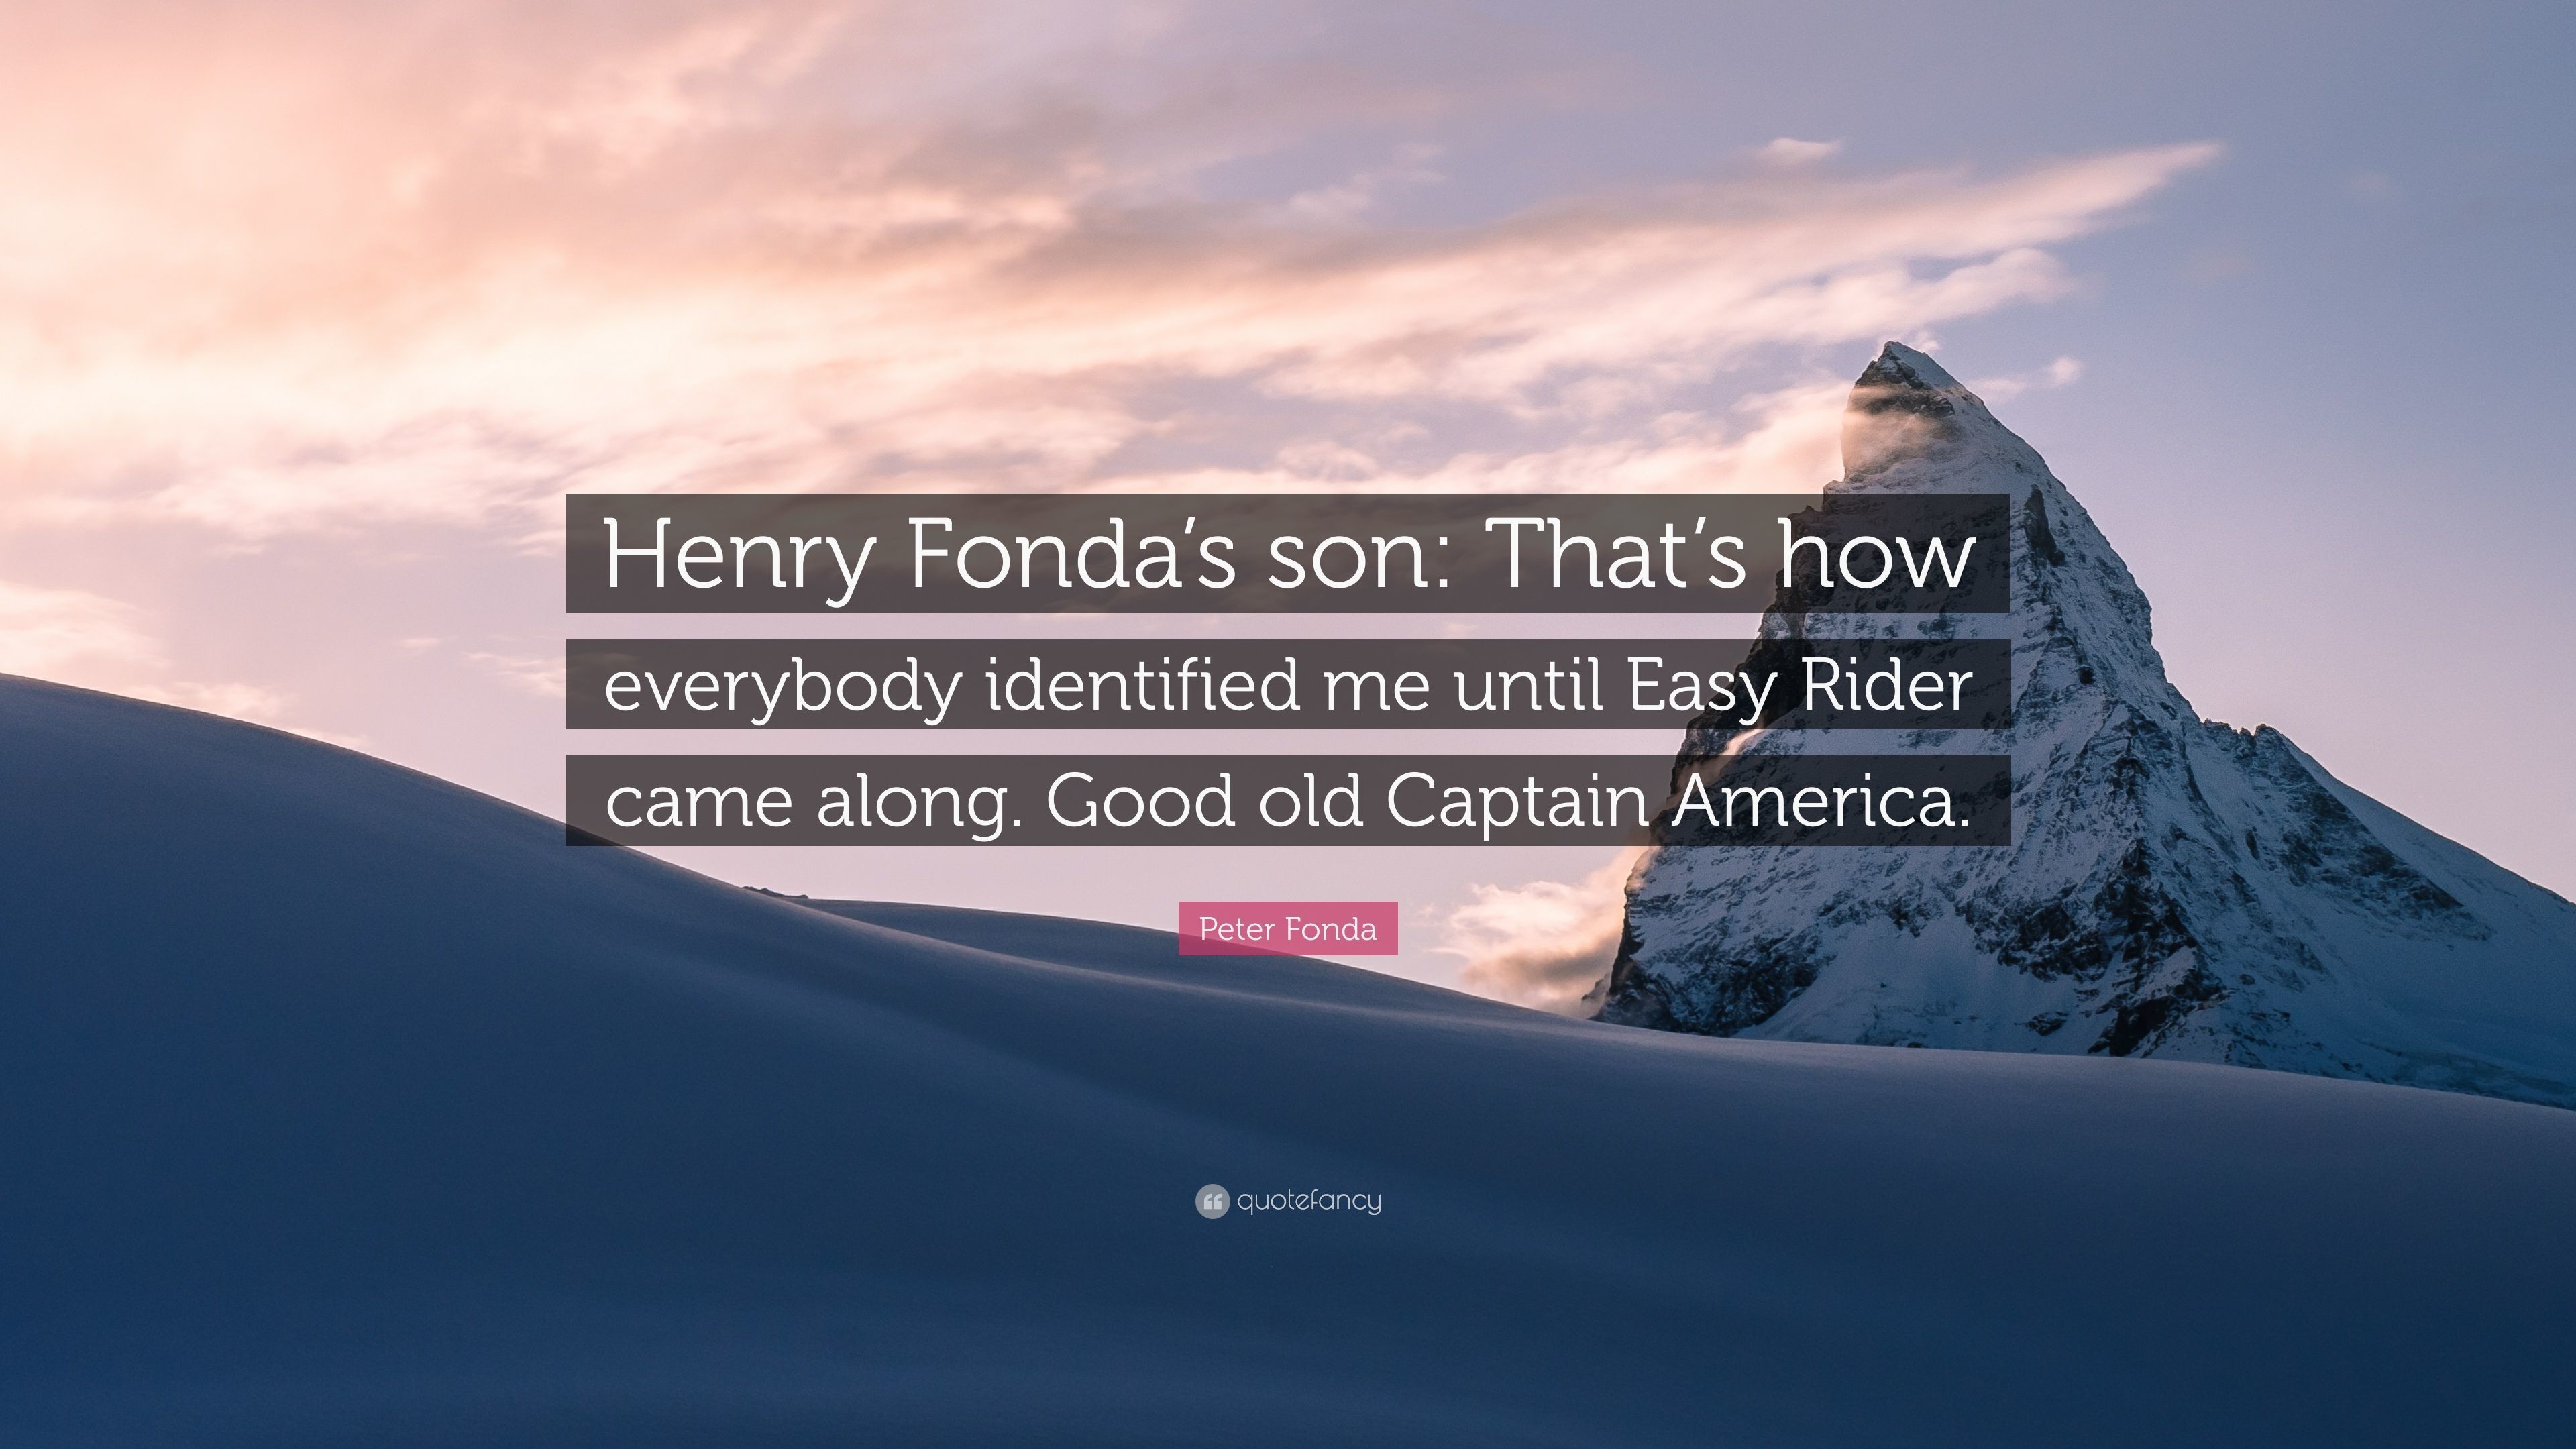 3840x2160 Peter Fonda Quote: “Henry Fonda's son: That's how everybody identified me  until Easy